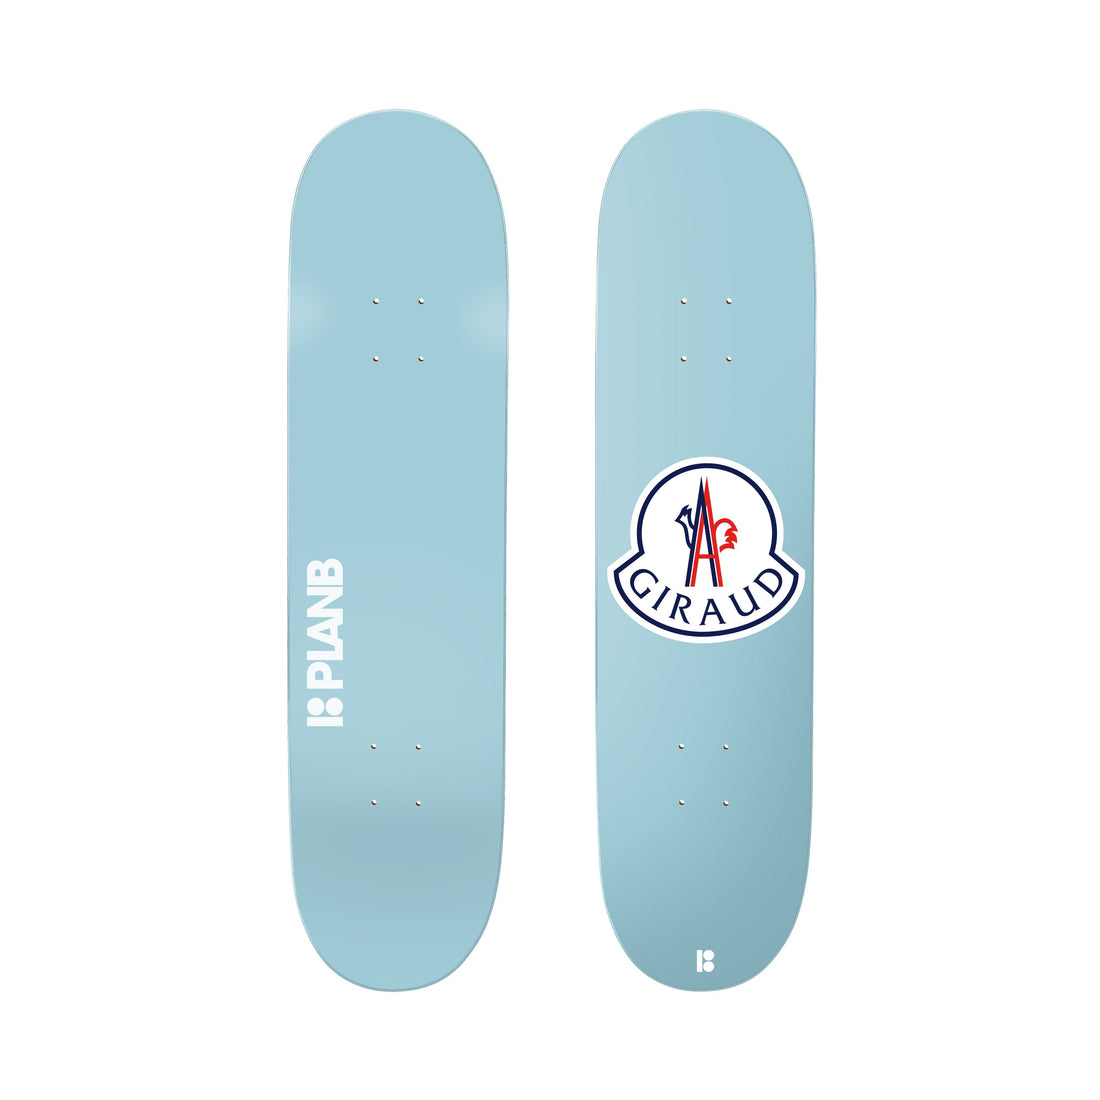 PlanB Rooster Giraud 8.5"